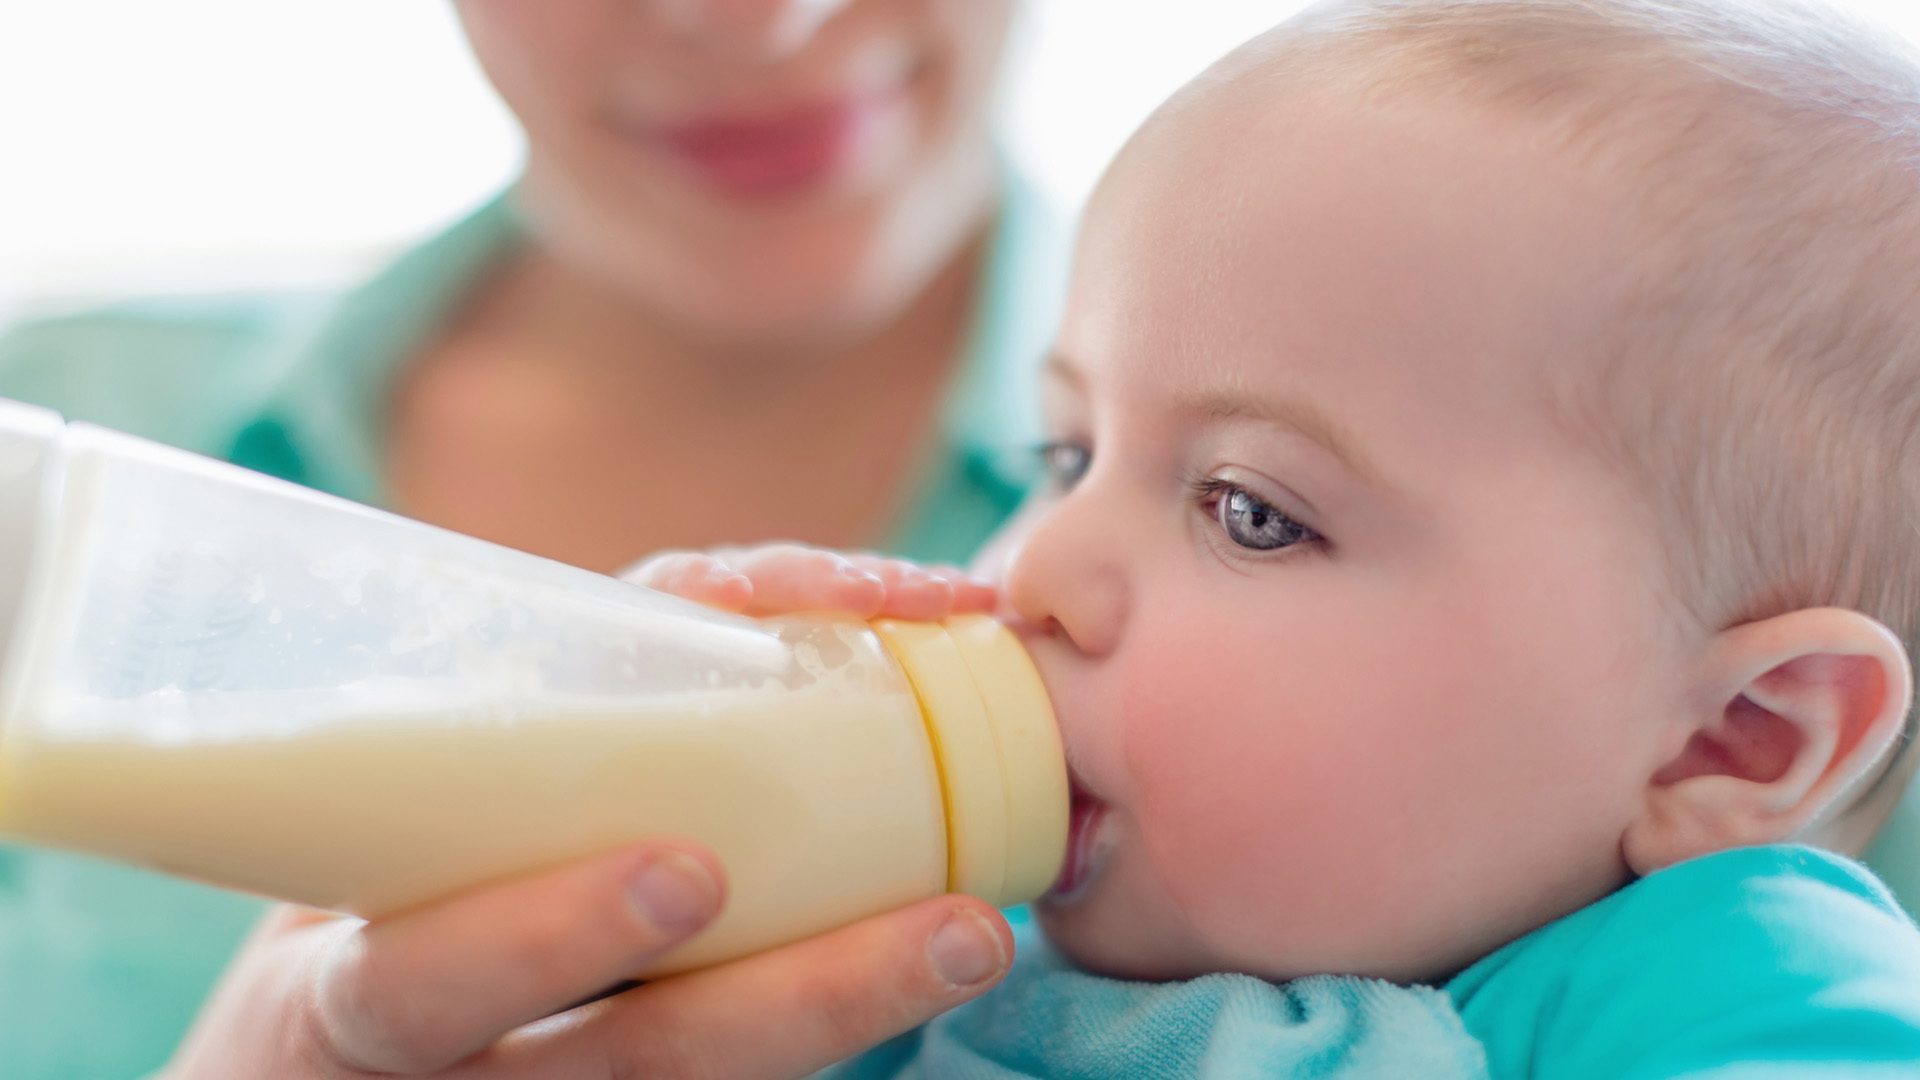 istock-photo-of-baby-and-a-bottle-1920x1080.jpg